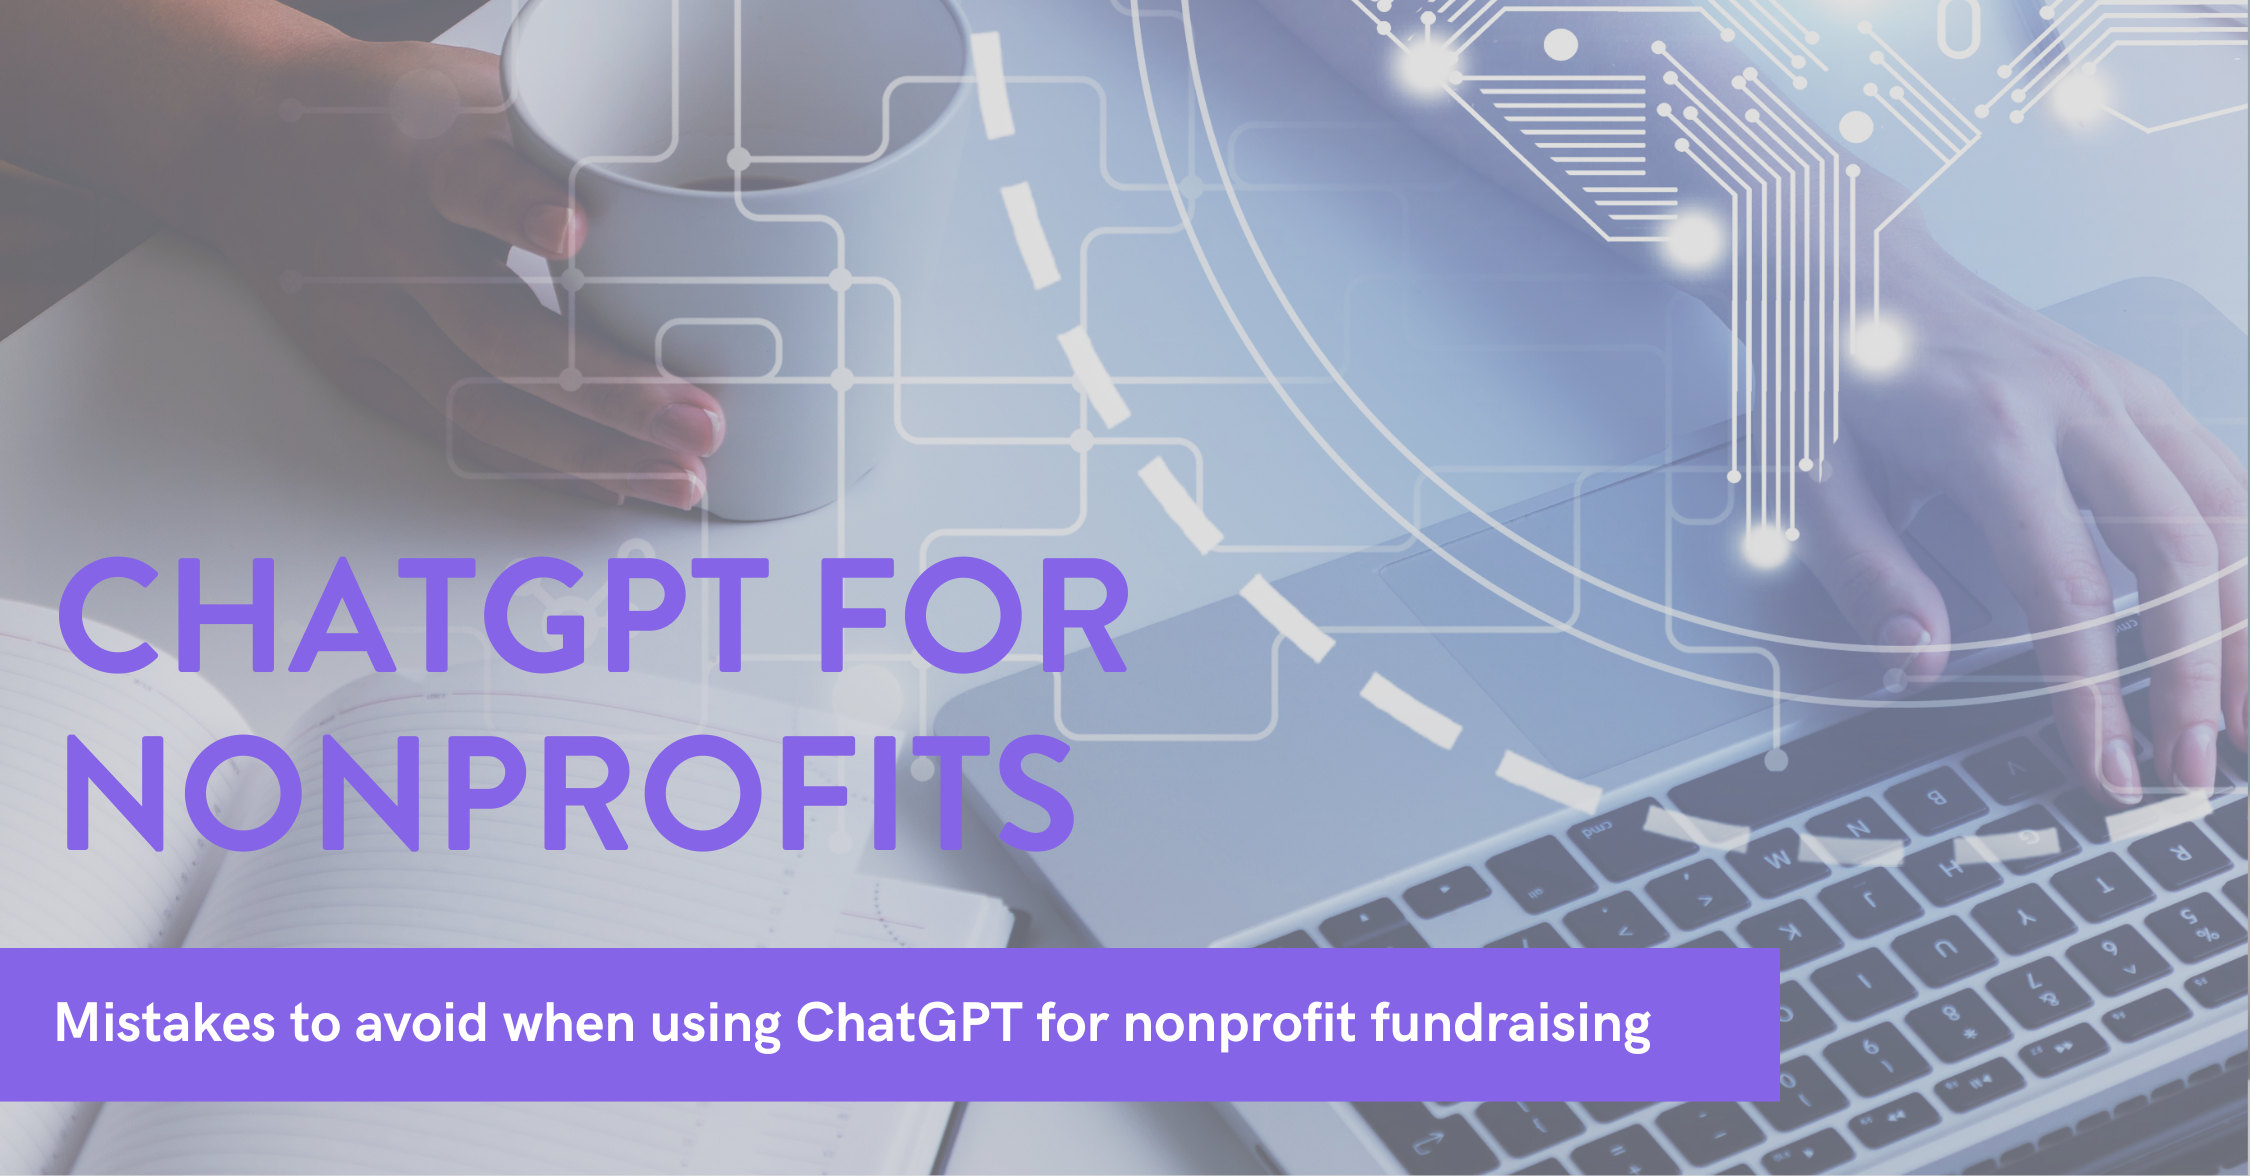 >ChatGPT for Nonprofit Fundraising: Common Mistakes To Avoid